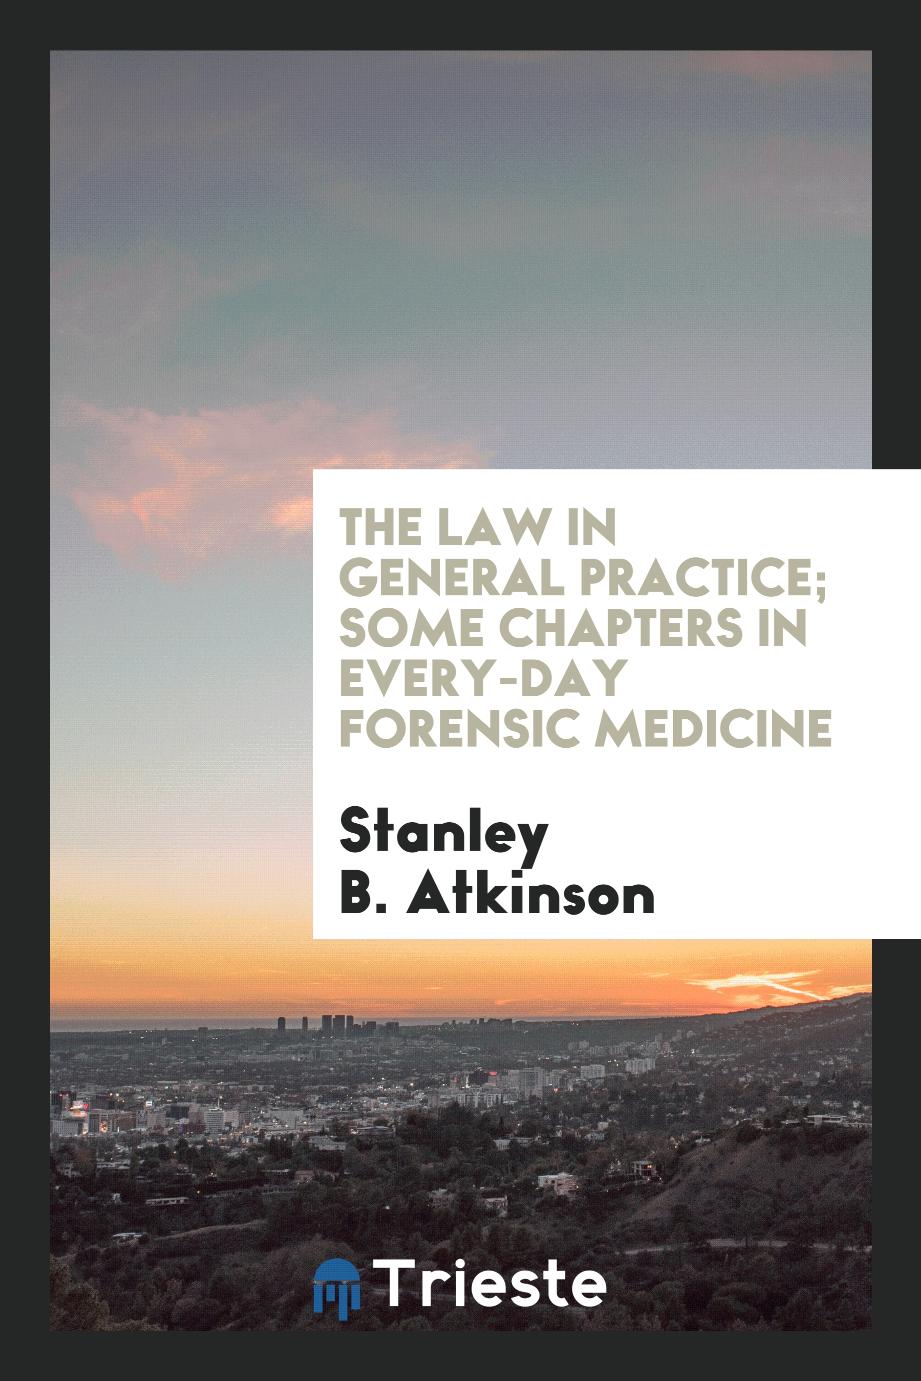 The law in general practice; some chapters in every-day forensic medicine